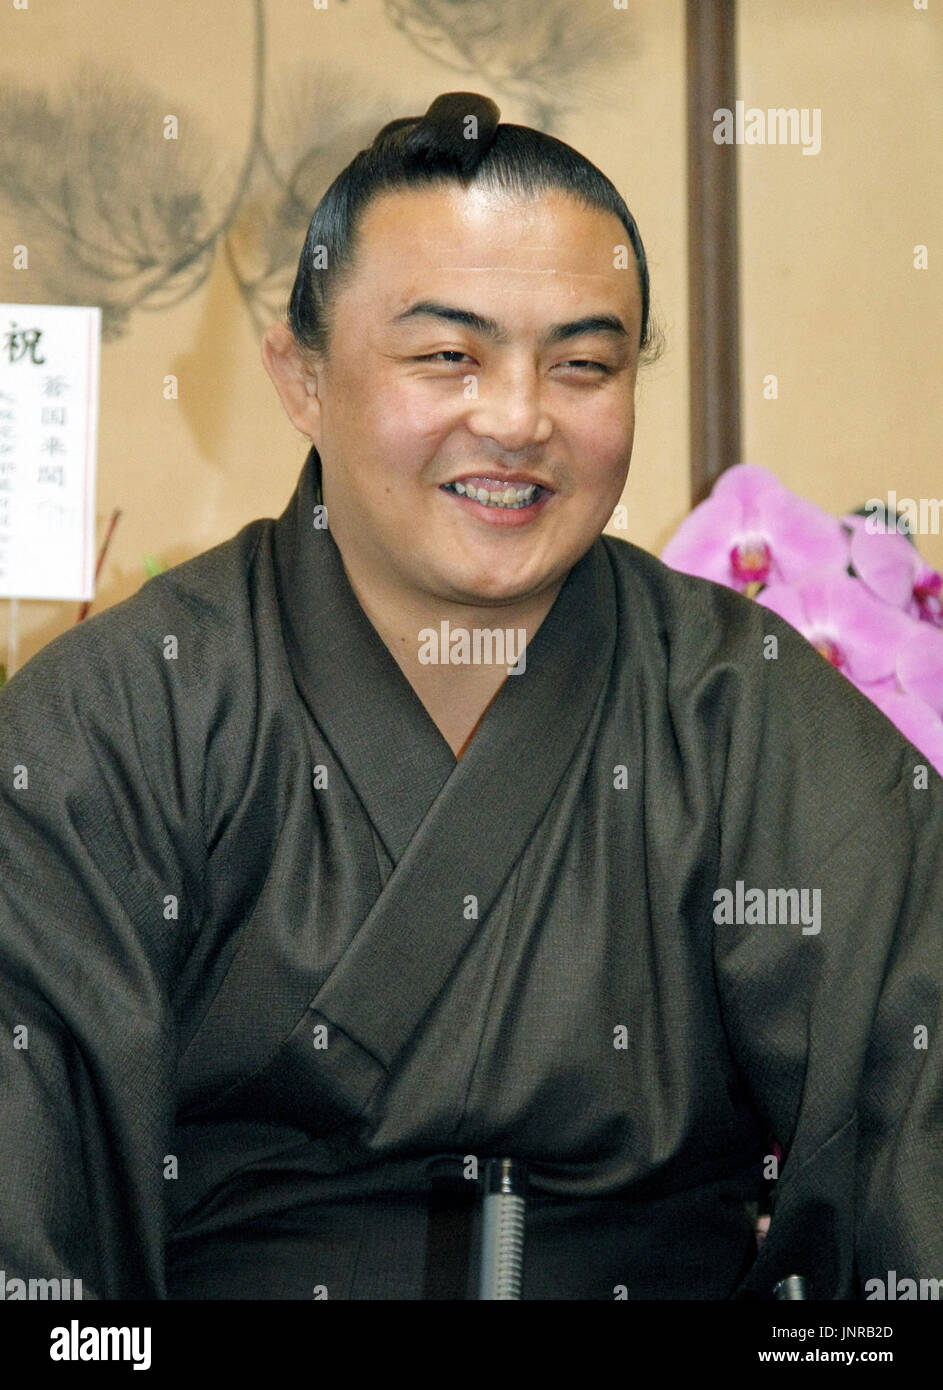 ONOJO, Japan - Chinese sumo wrestler Sokokurai smiles during a news conference at the Arashino stable in Fukuoka Prefecture on Dec. 2, 2009. After posting a 5-2 mark in the third-tier makushita division of the Kyushu Grand Sumo Tournament, the 25-year old became the second Chinese wrestler to fight in the second-tier juryo division, following Osaka-born Chinese national Kiyonohana in the 1970s. (Kyodo) Stock Photo